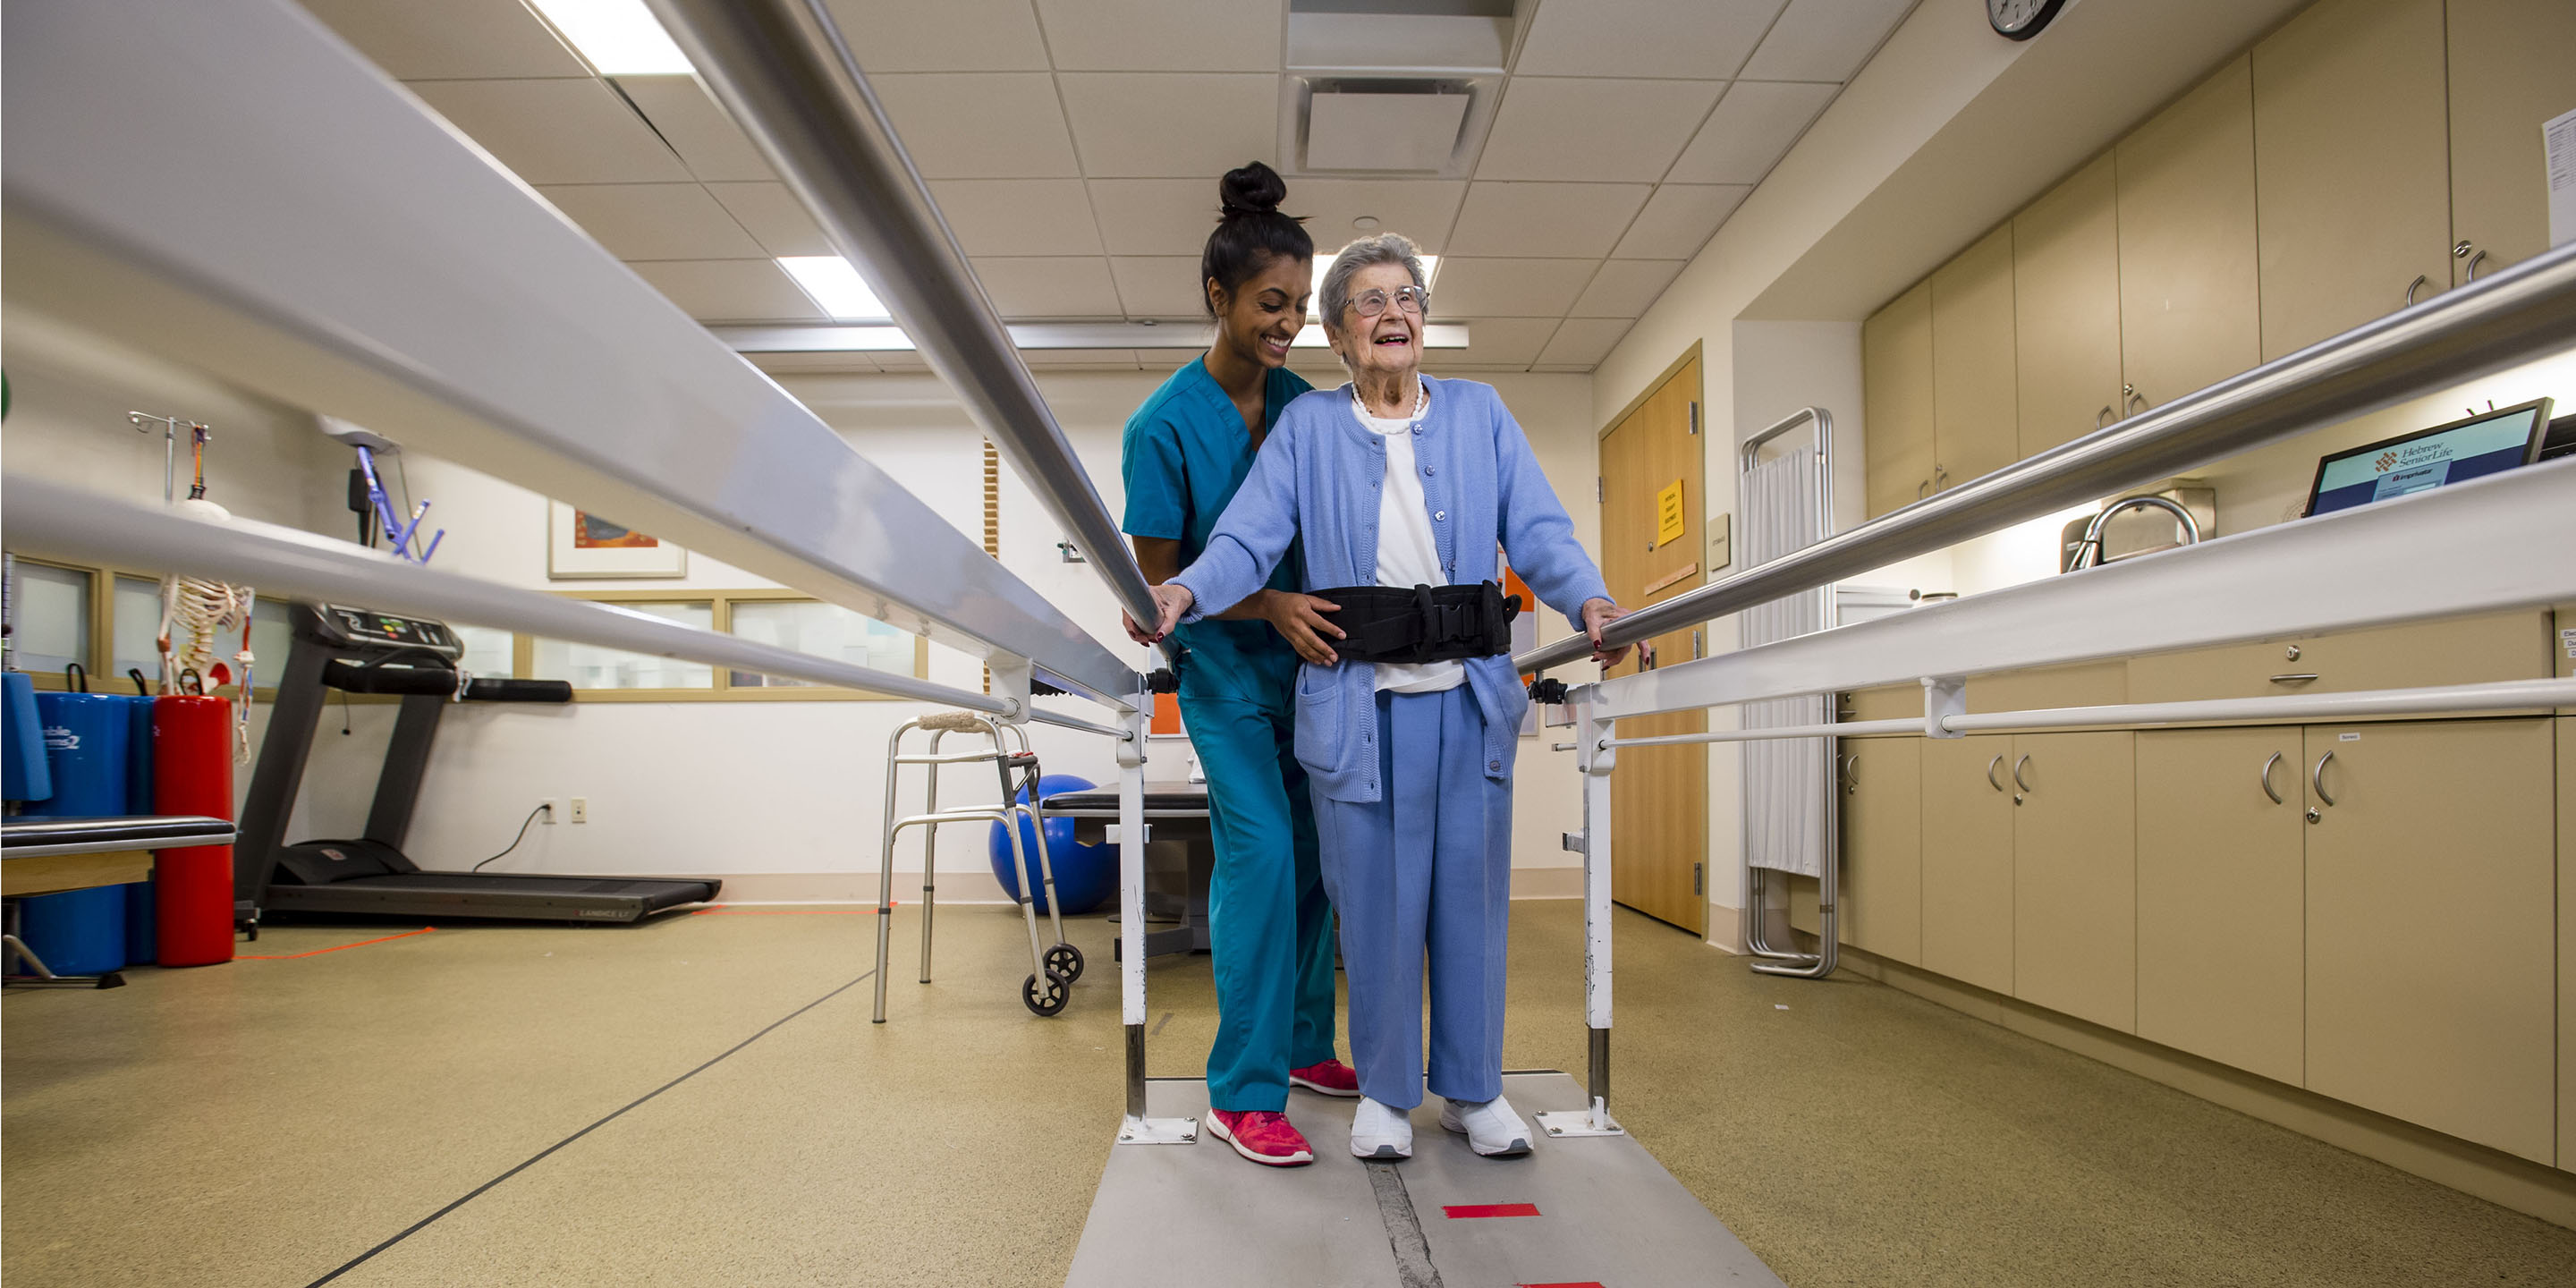 Nursing Home vs Skilled Nursing: What's the Difference & What Do